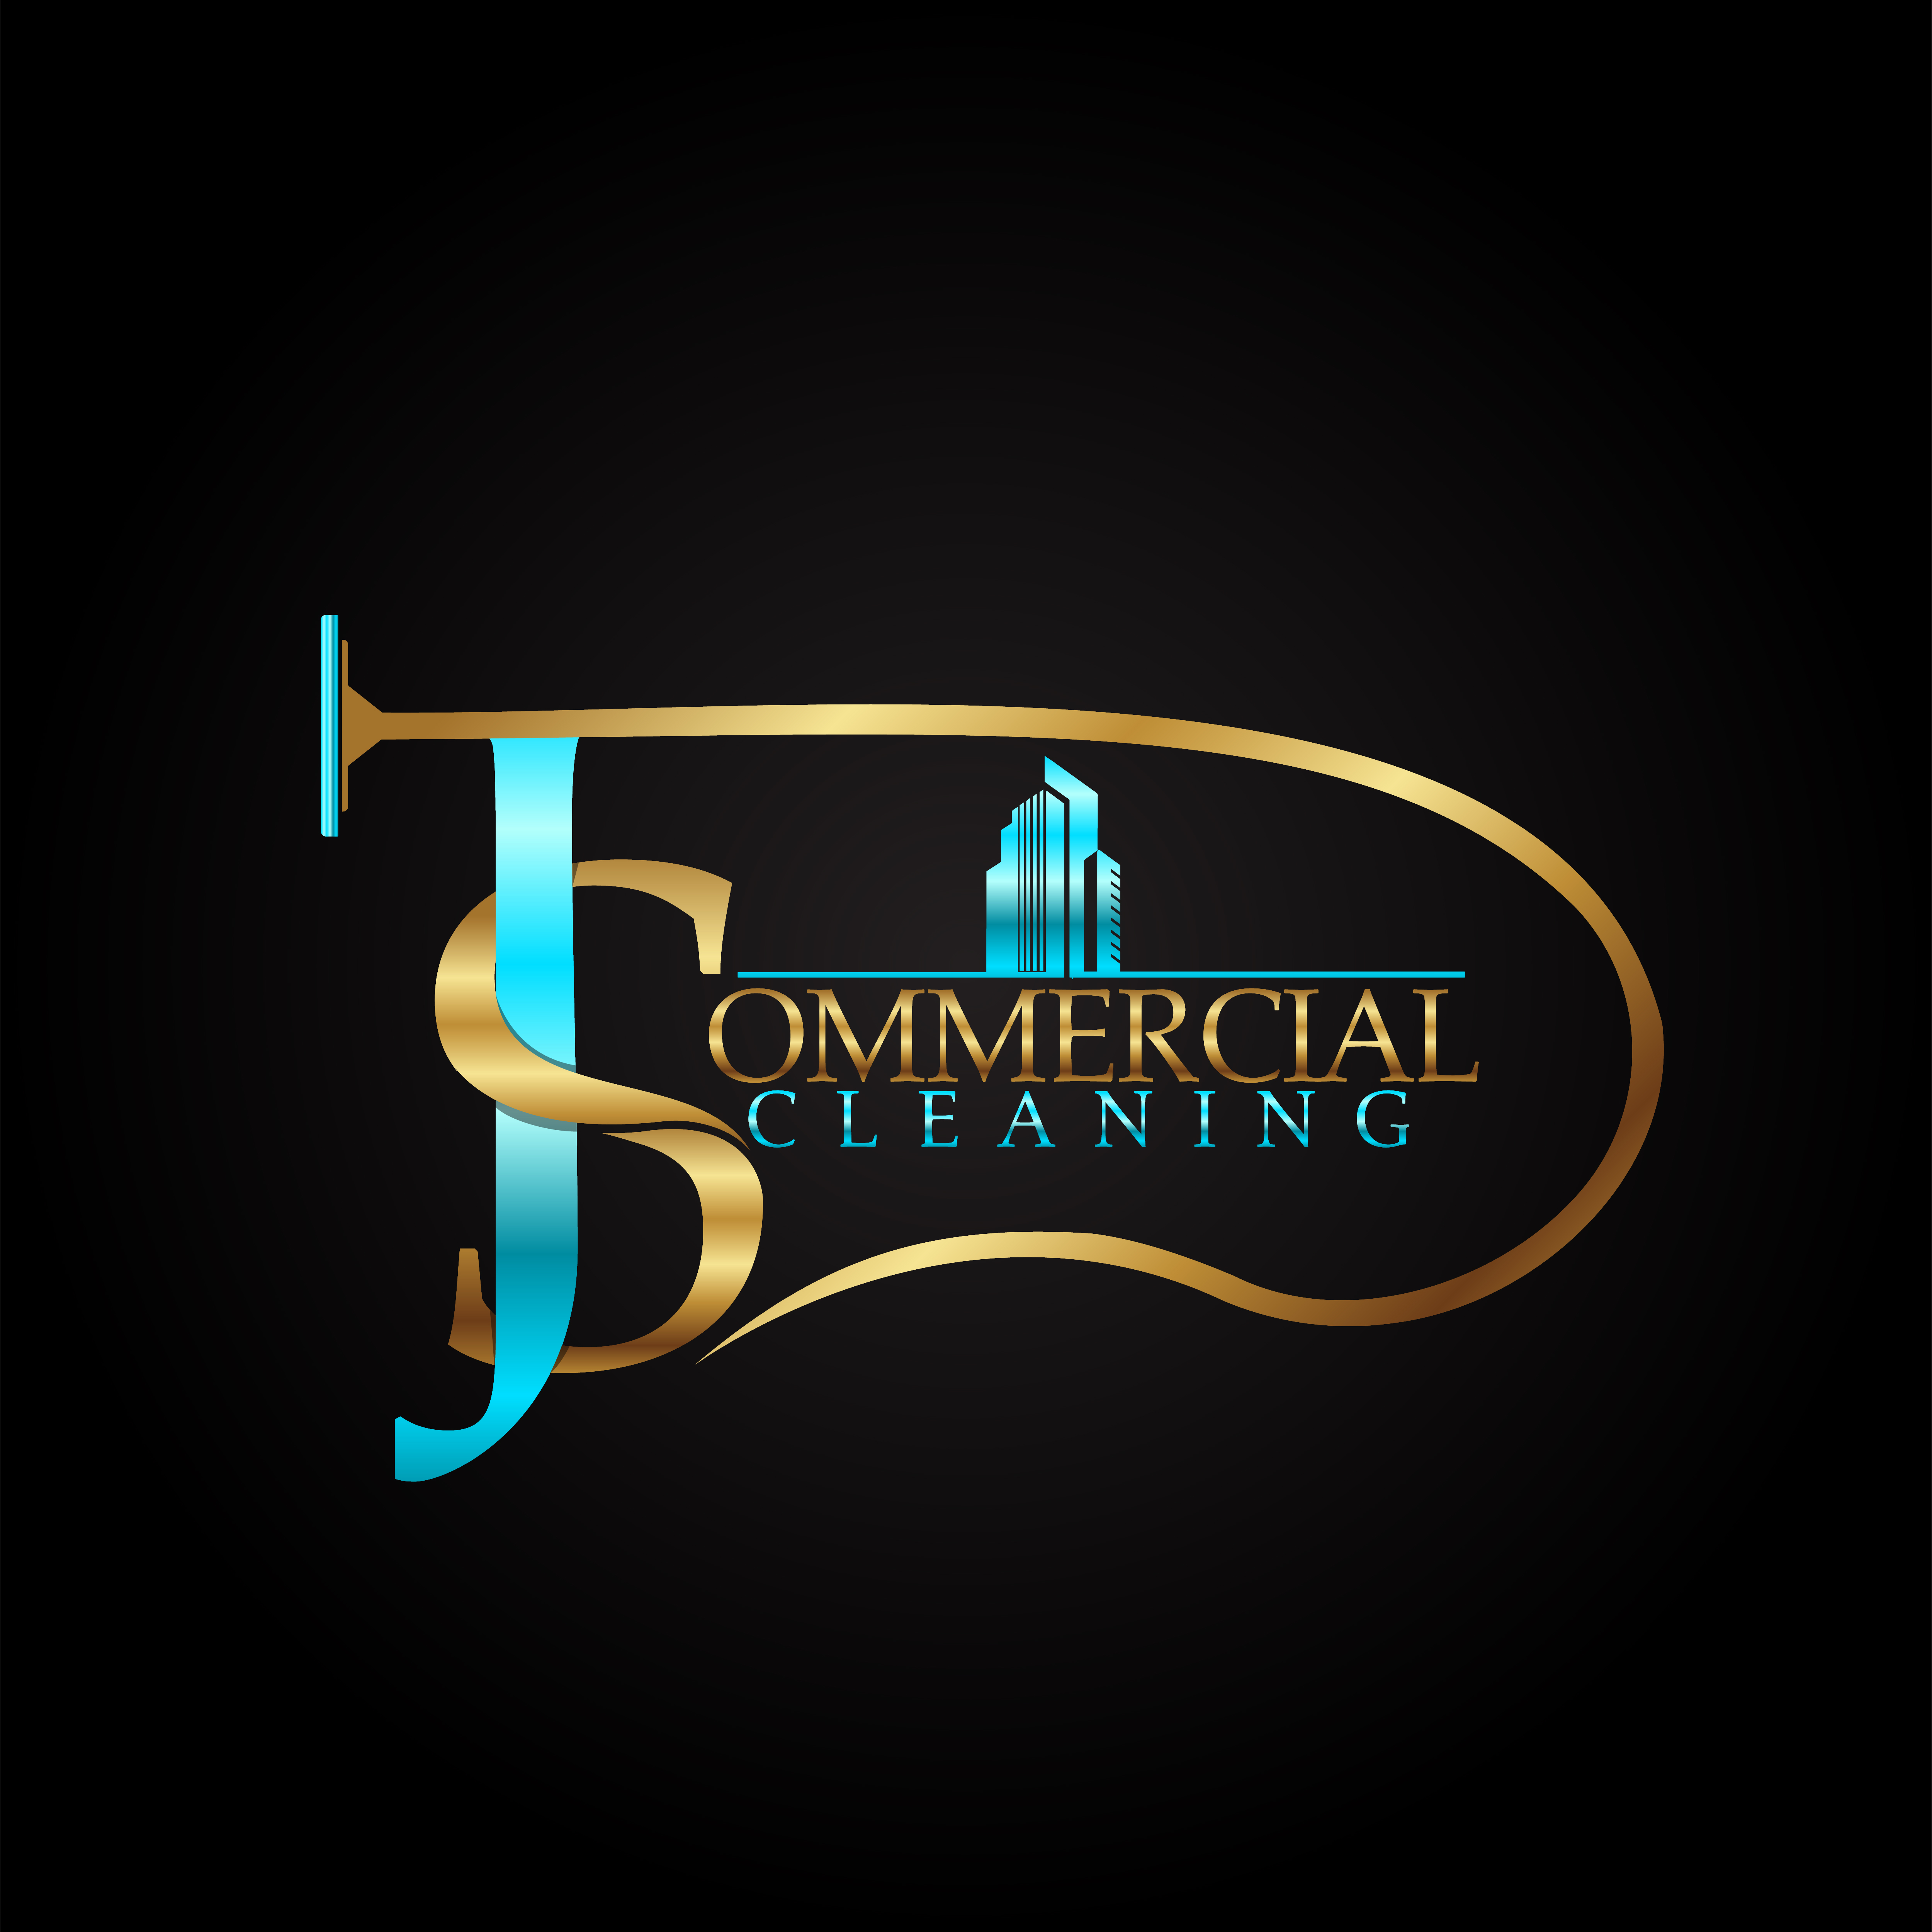 JS Commercial Cleaning-Unlicensed Contractor Logo